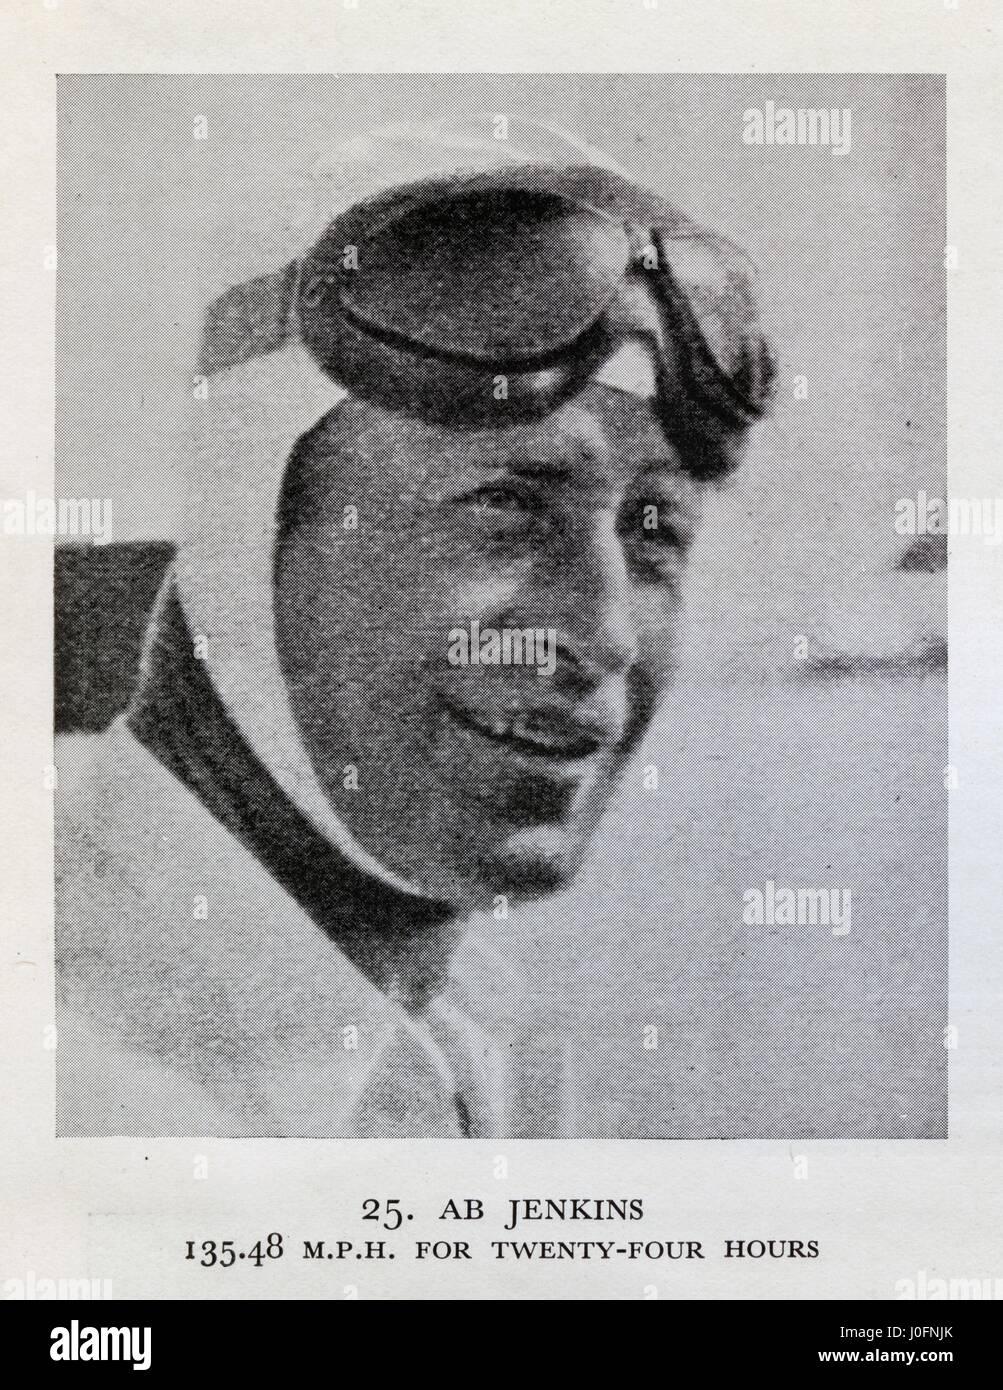 Portrait of Ab Jenkins: holding the record for 135.48 mph for 24 hours average land speed, obtained in 1935 Stock Photo